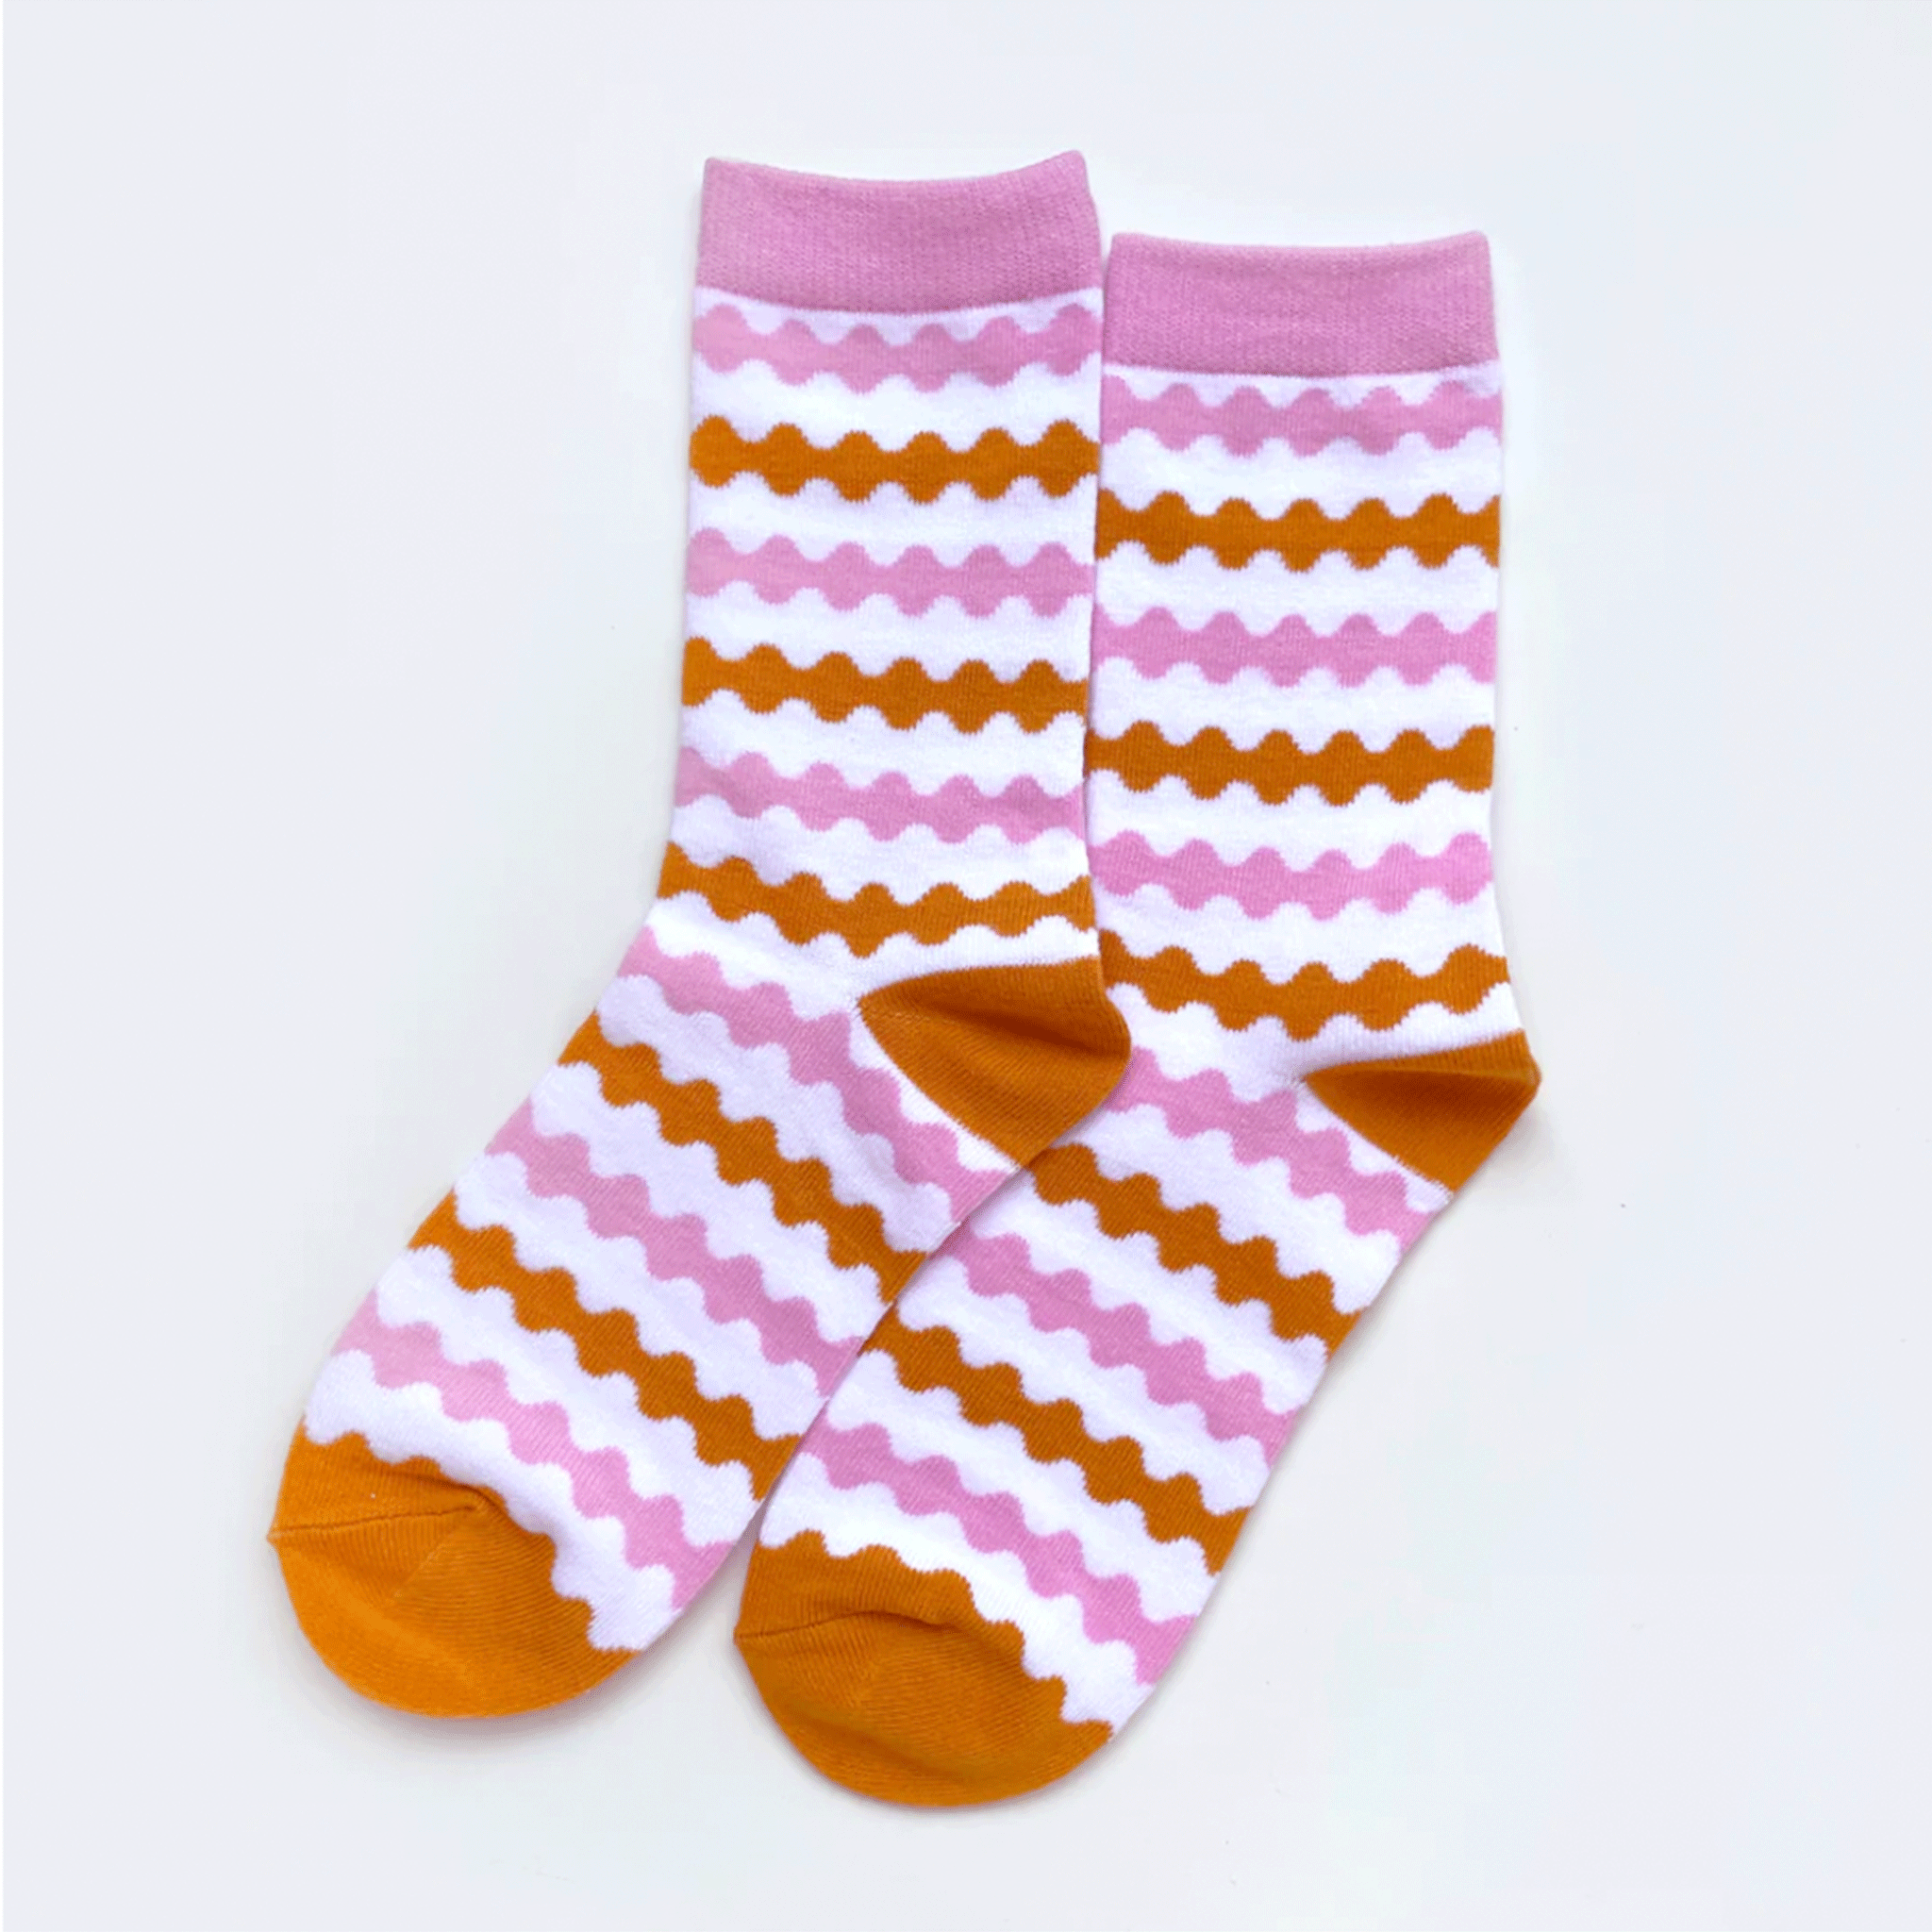 On a white background is pink and orange striped socks. 